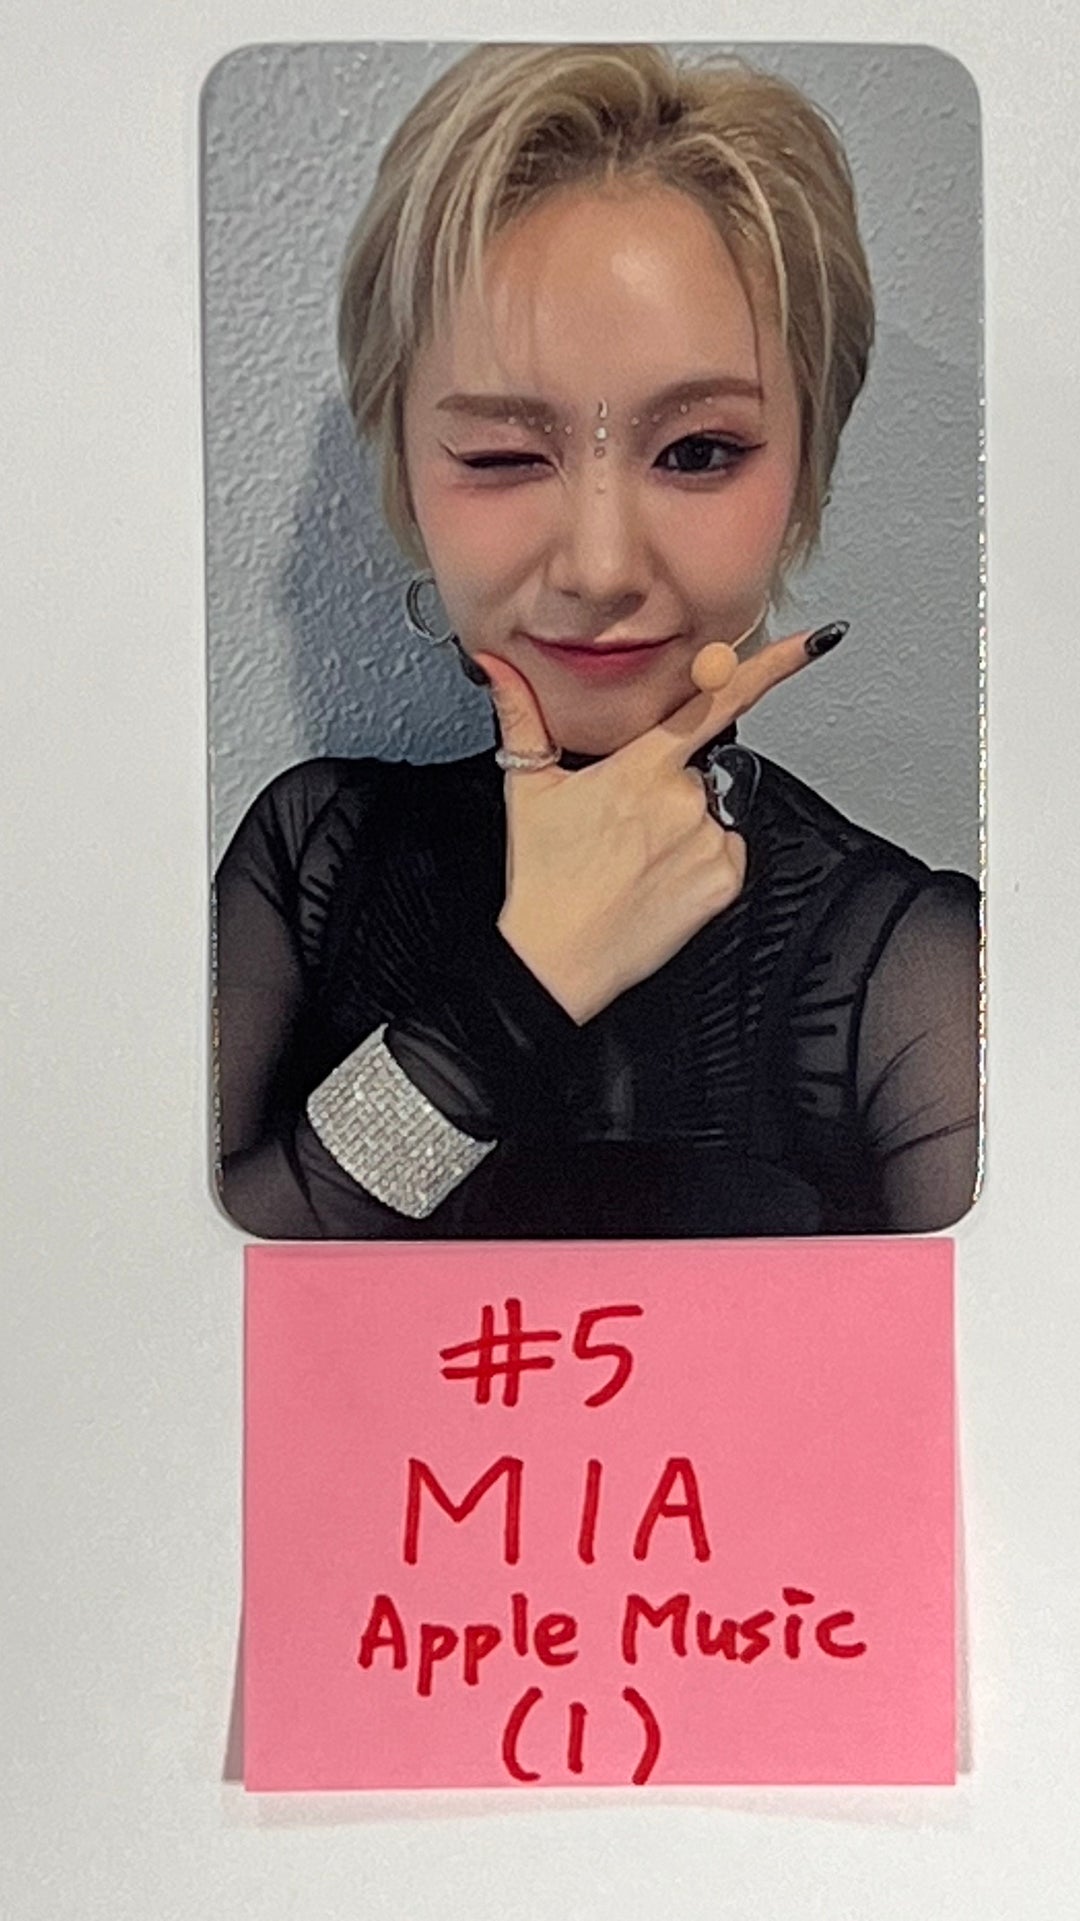 Everglow "ALL MY GIRLS" - Apple Music Fansign Event Photocard Round 2 [23.09.18]